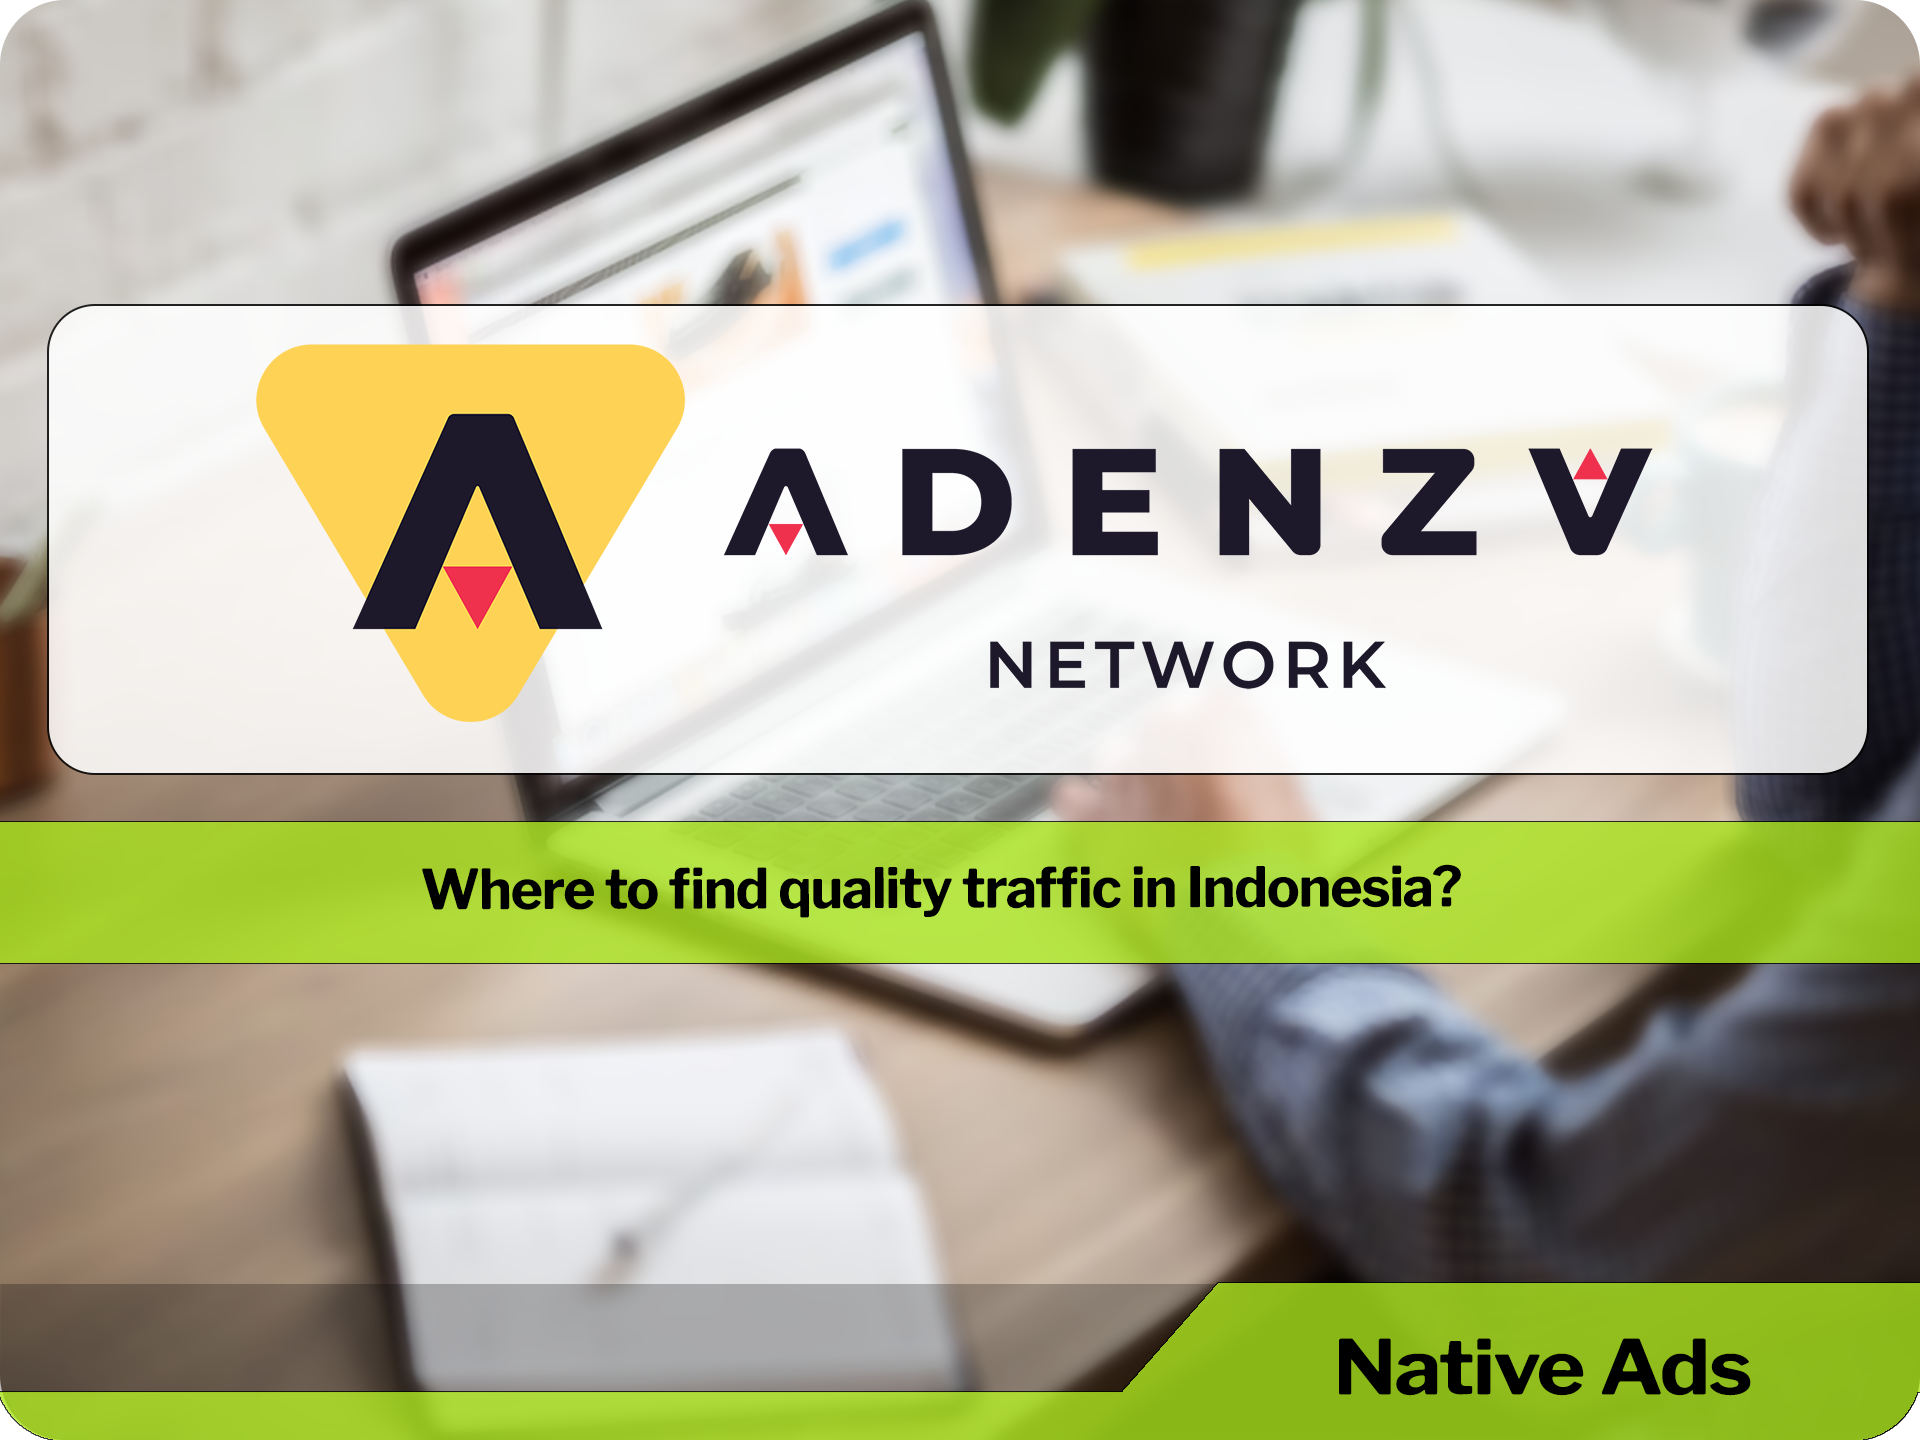 Where to find quality traffic in Indonesia? Adenza network